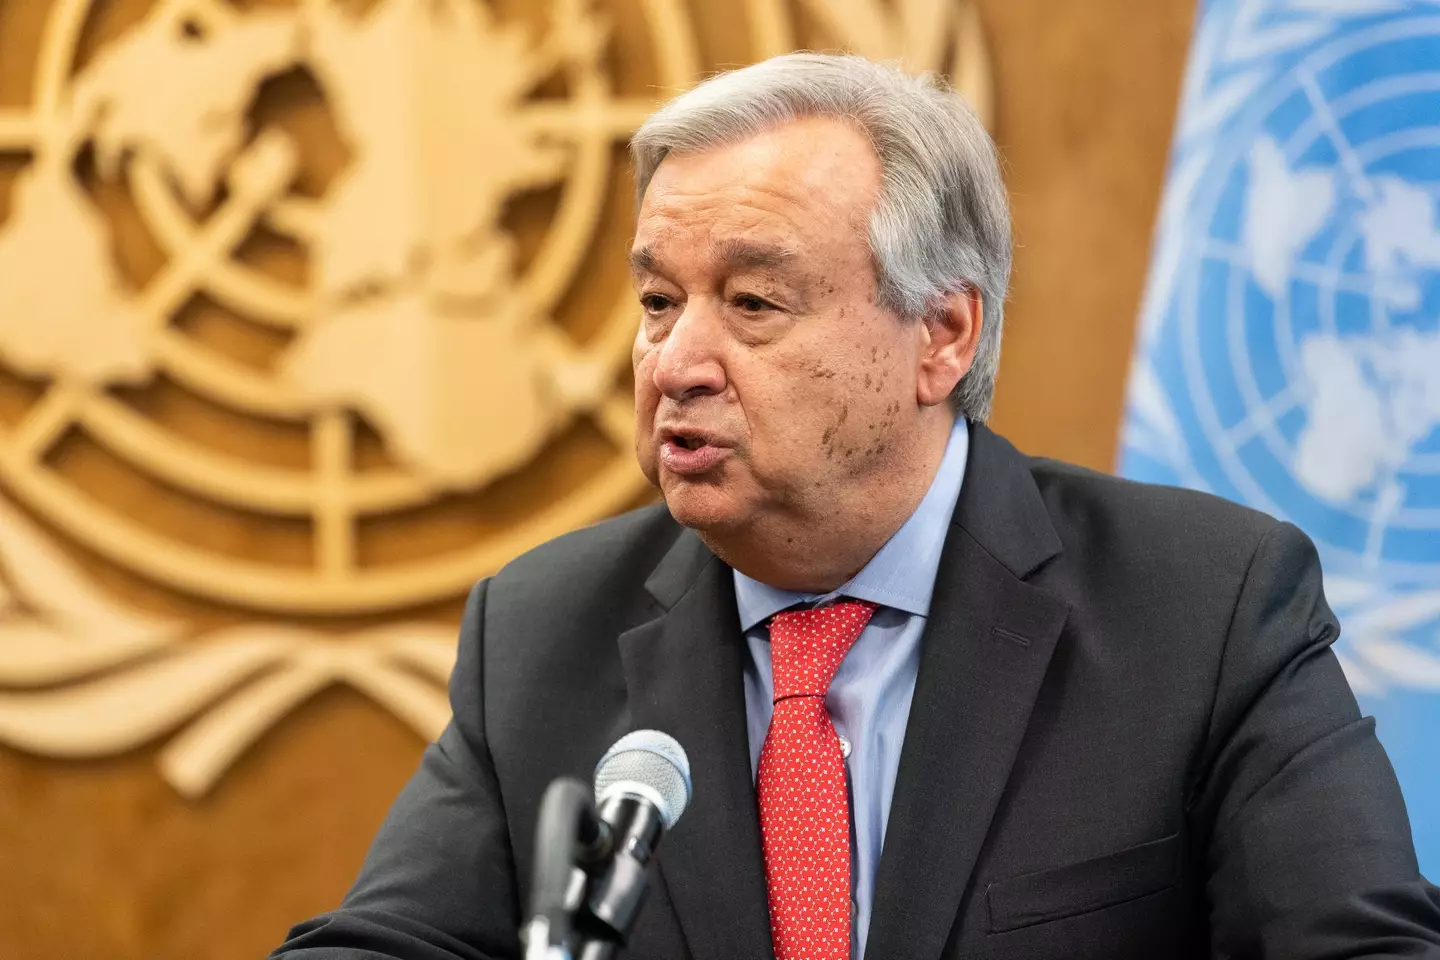 The UN secretary-general pointed to conflicts across the world as a worrying issue.